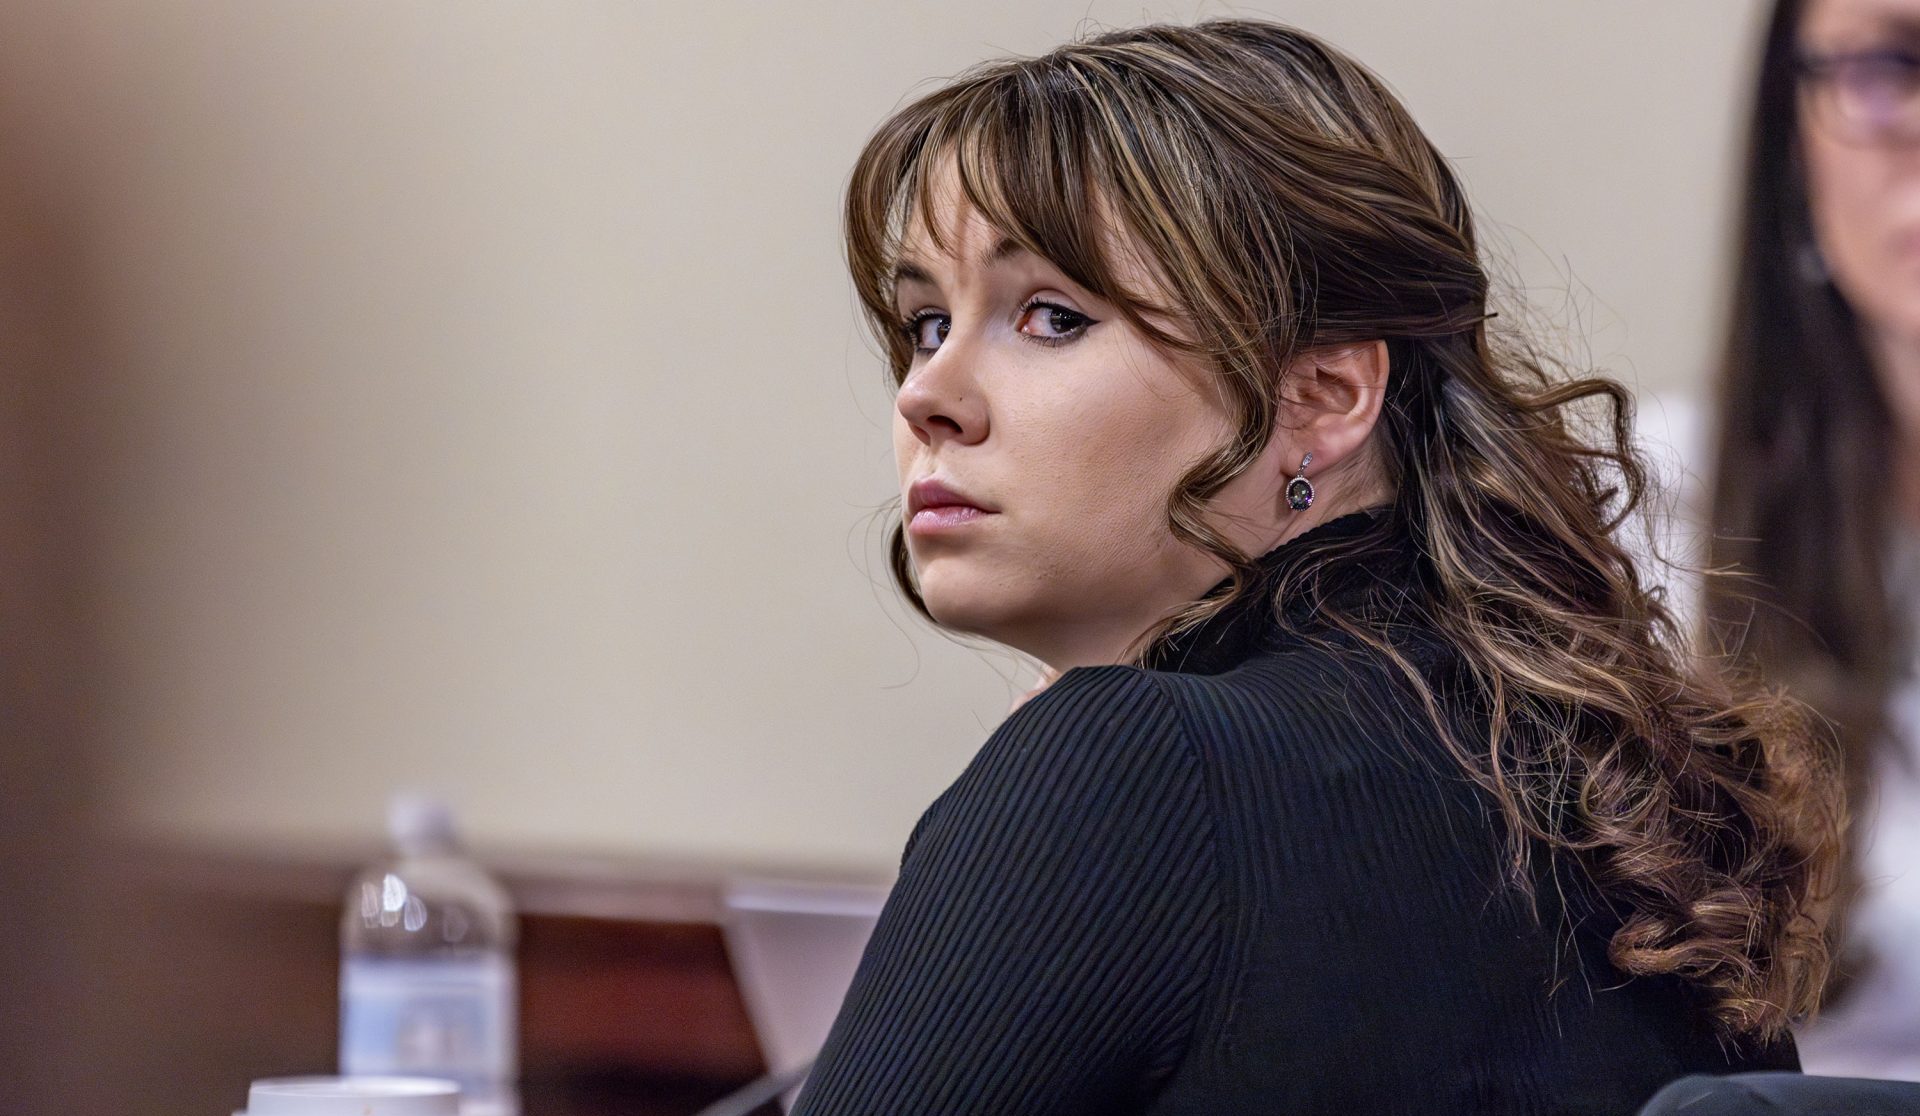 Weapons Supervisor Found Guilty In Alec Baldwin Movie Shooting Hannah Gutierrez-Reed